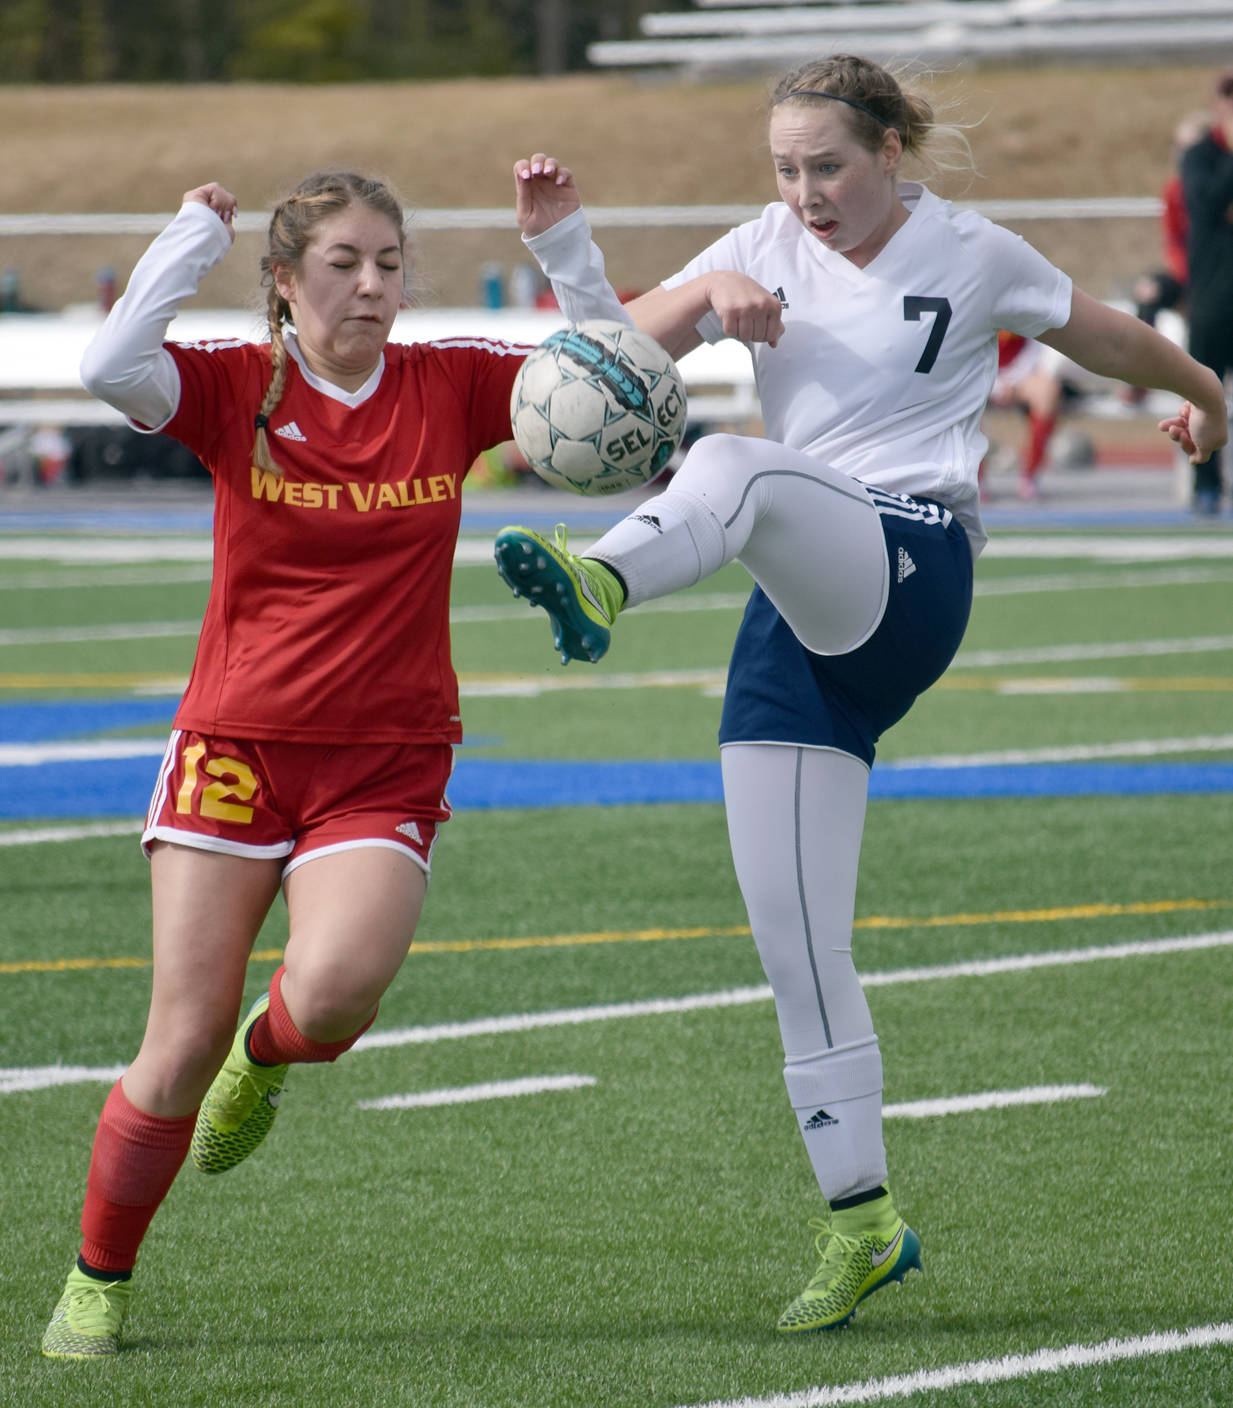 West Valley’s Alyssa Mandich runs through the ball as Soldotna’s Journey Miller volleys the ball to safety Friday, April 28, 2017, at Soldotna High School. (Photo by Jeff Helminiak/Peninsula Clarion)